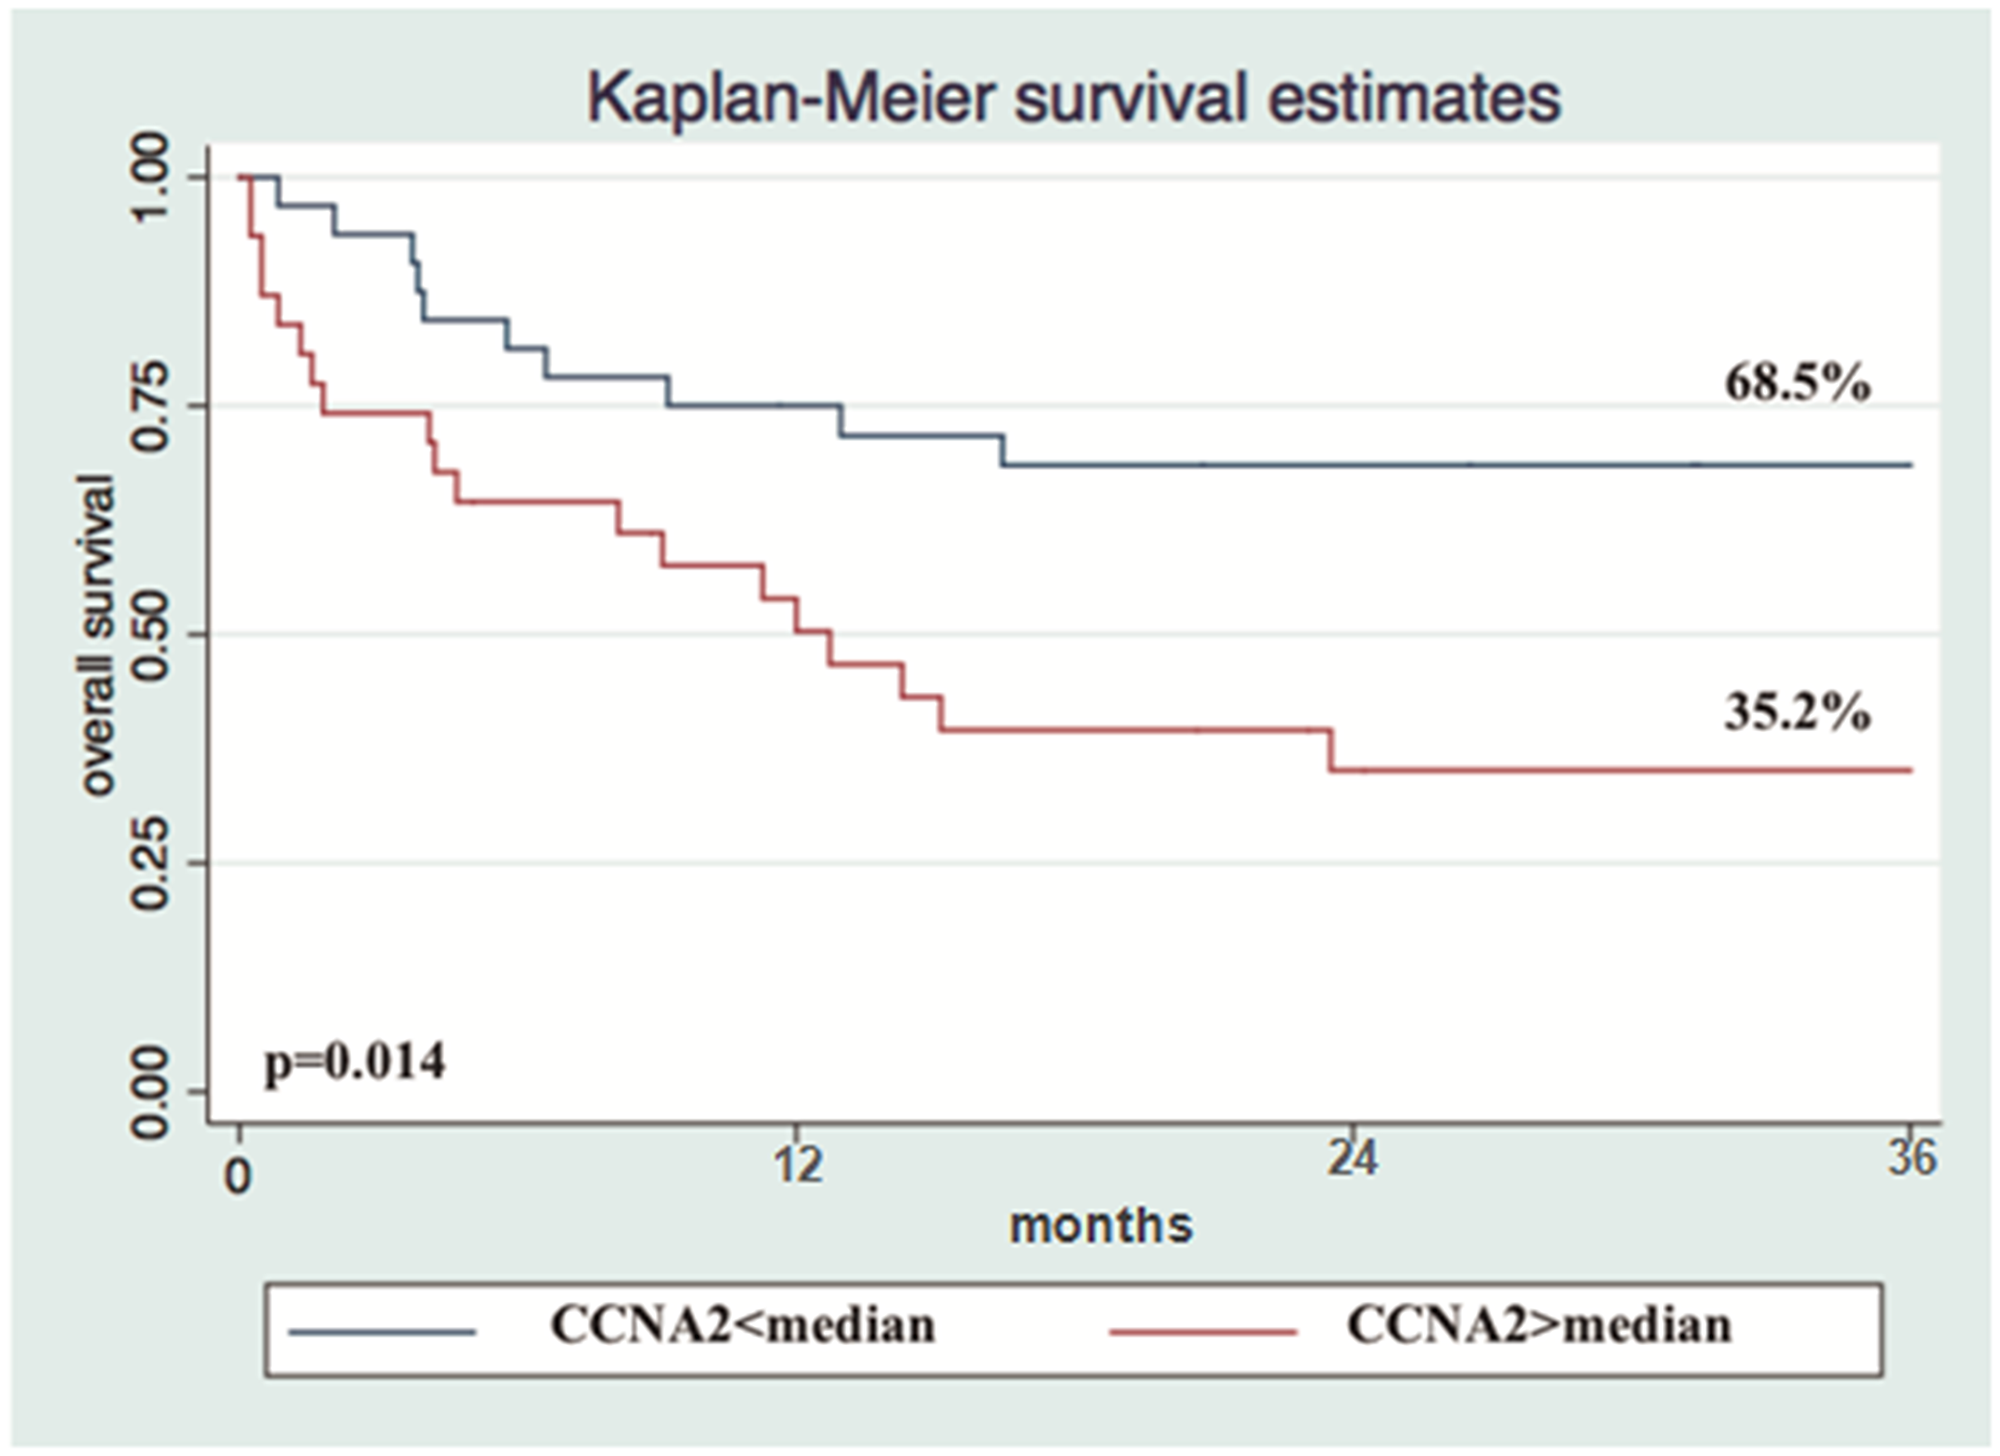 Overexpression of CCNA2 gene is a determinant marker of poor prognosis in nodal PTCL.